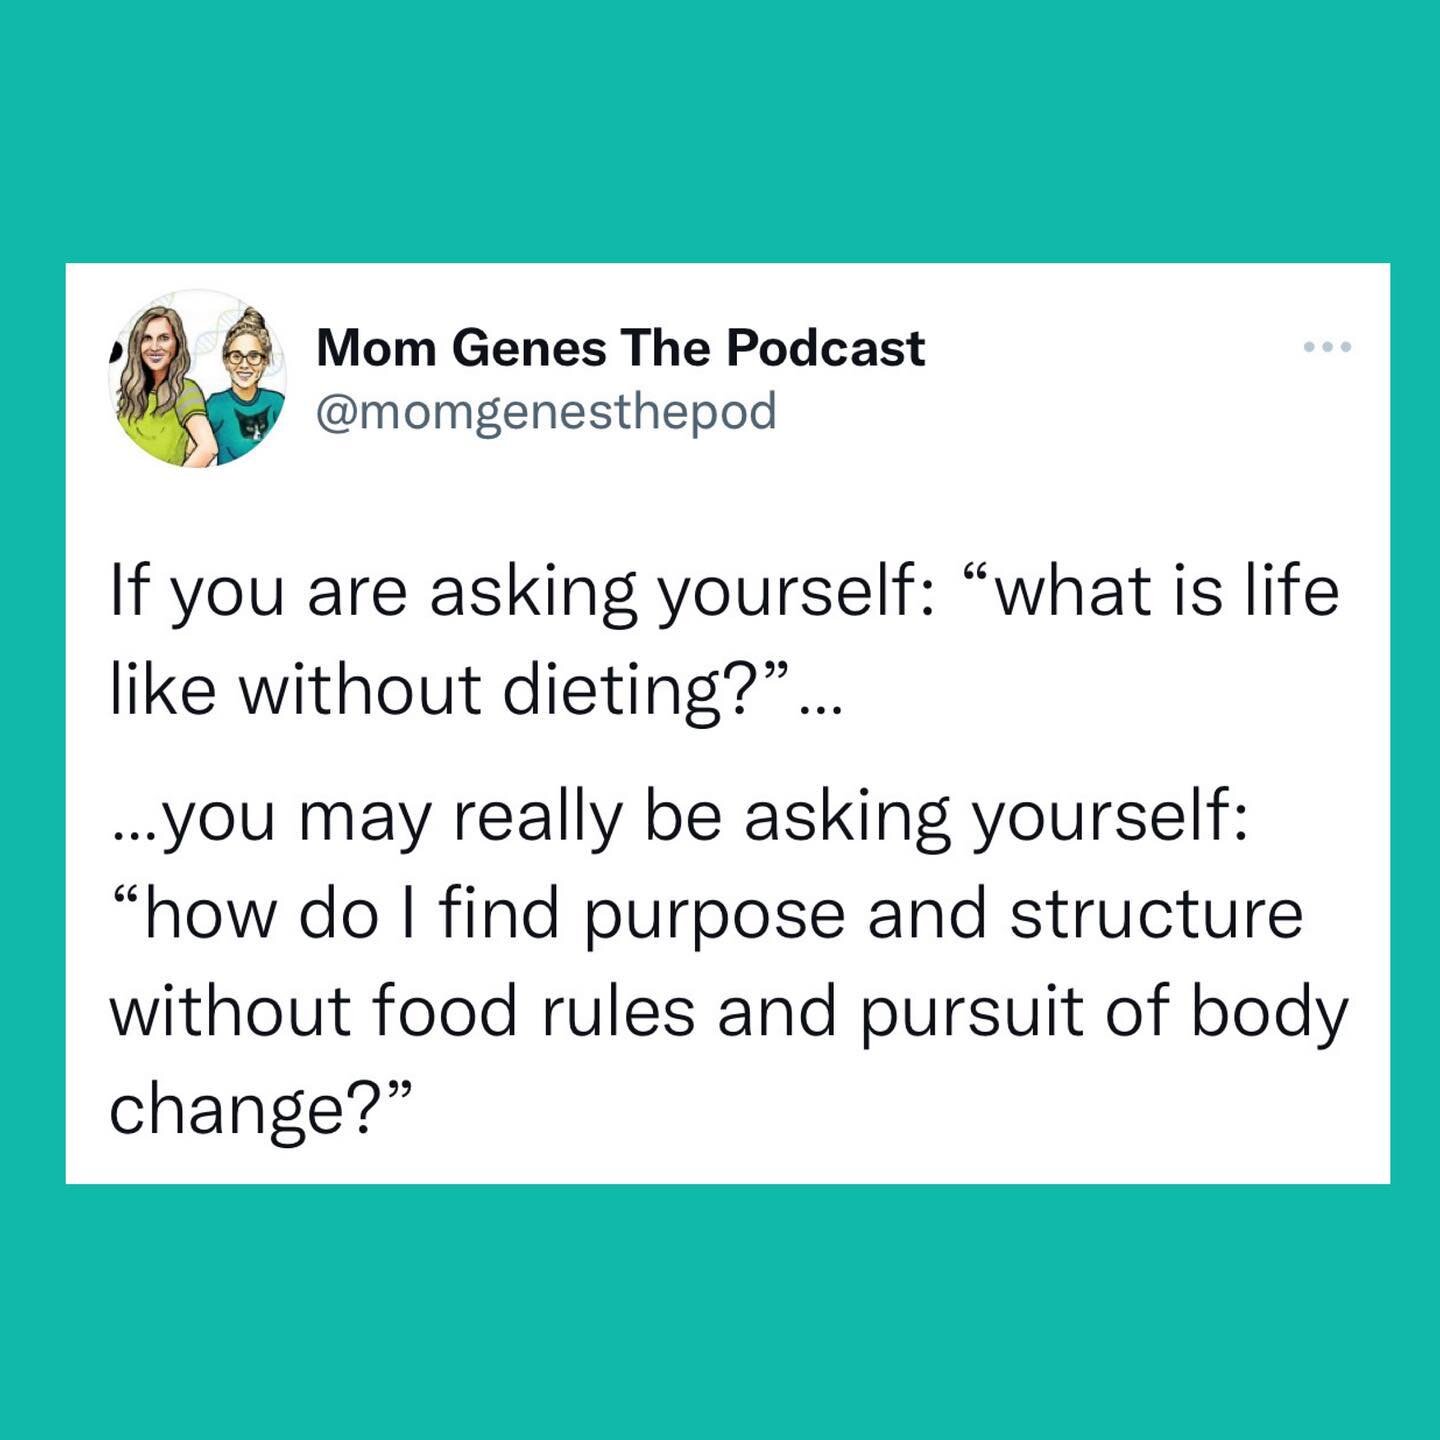 Chronic dieting can serve many psychological purposes, including as a coping skill for emotional distress or a distraction from underlying issues you are avoiding. If we have a lived a life of trying fad diets and finding community connections in die